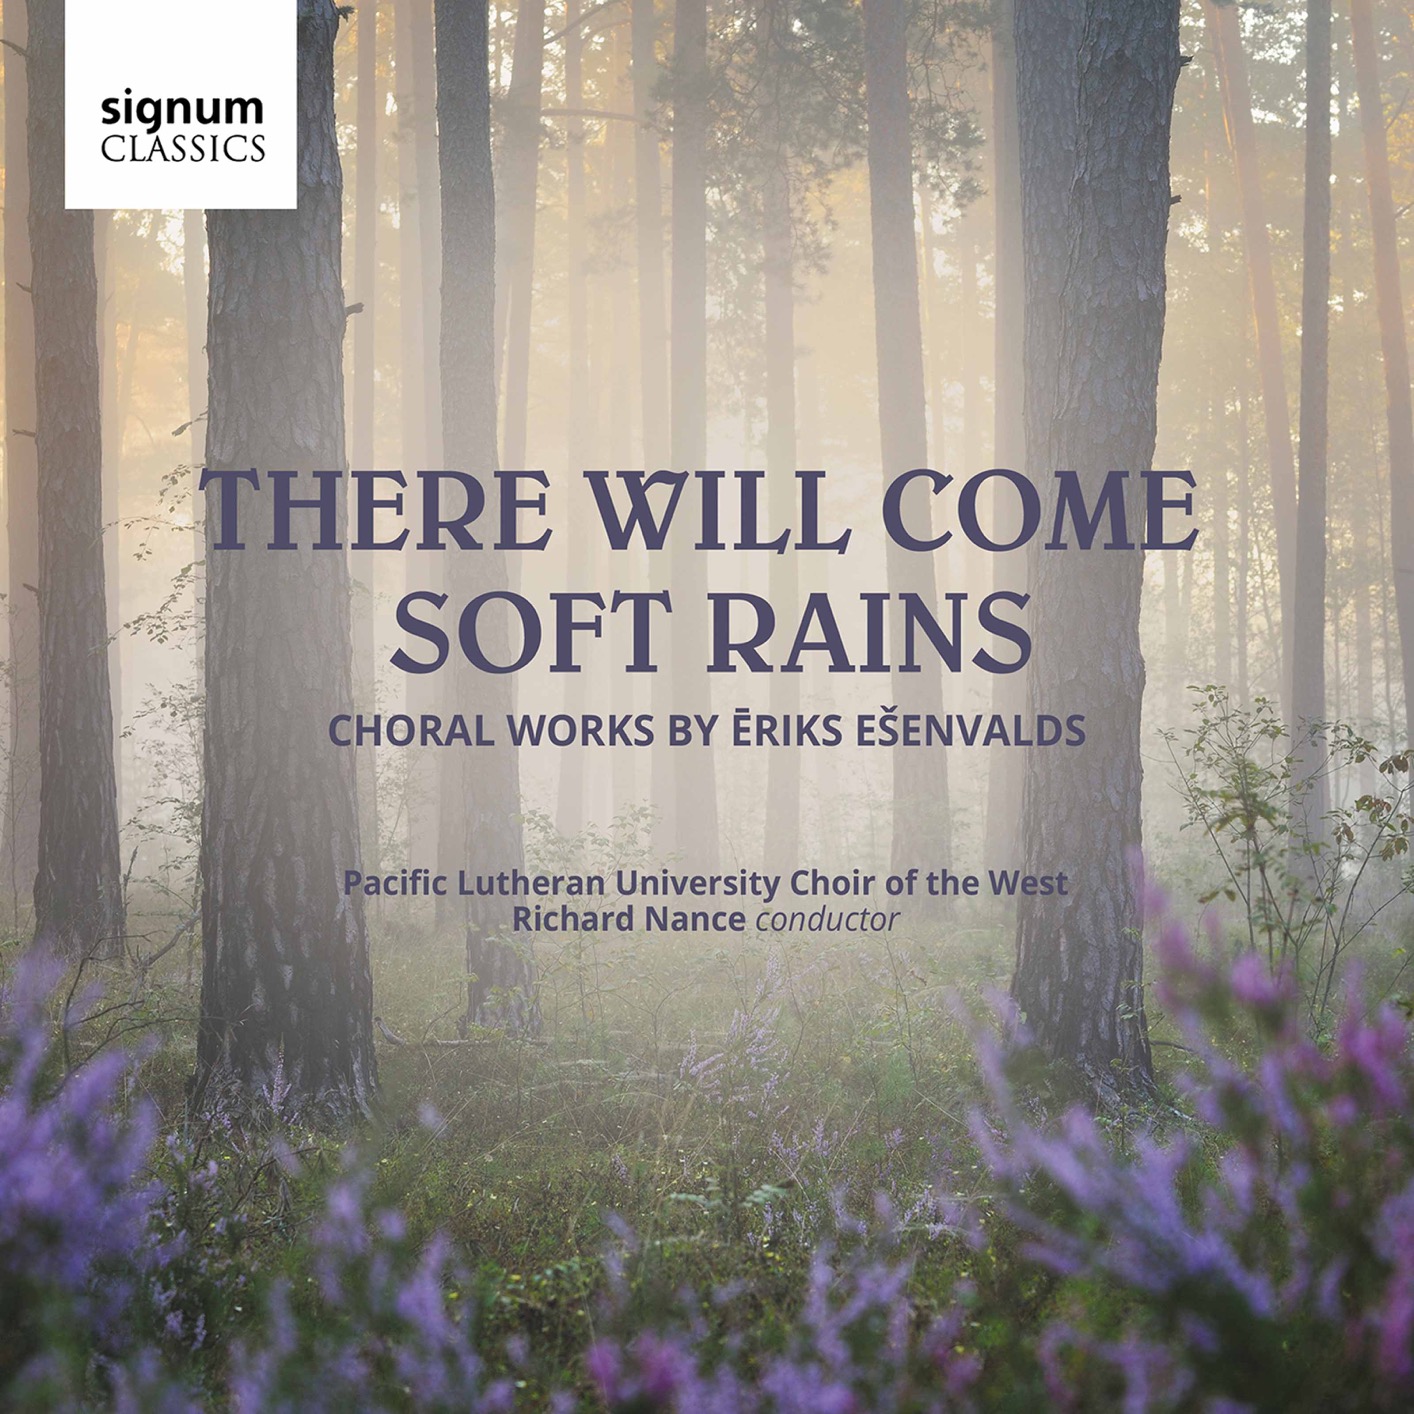 Pacific Lutheran University Choir of the West & Richard Nance – There Will Come Soft Rains: Choral Music by Ēriks Ešenvalds (2020) [FLAC 24bit/96kHz]